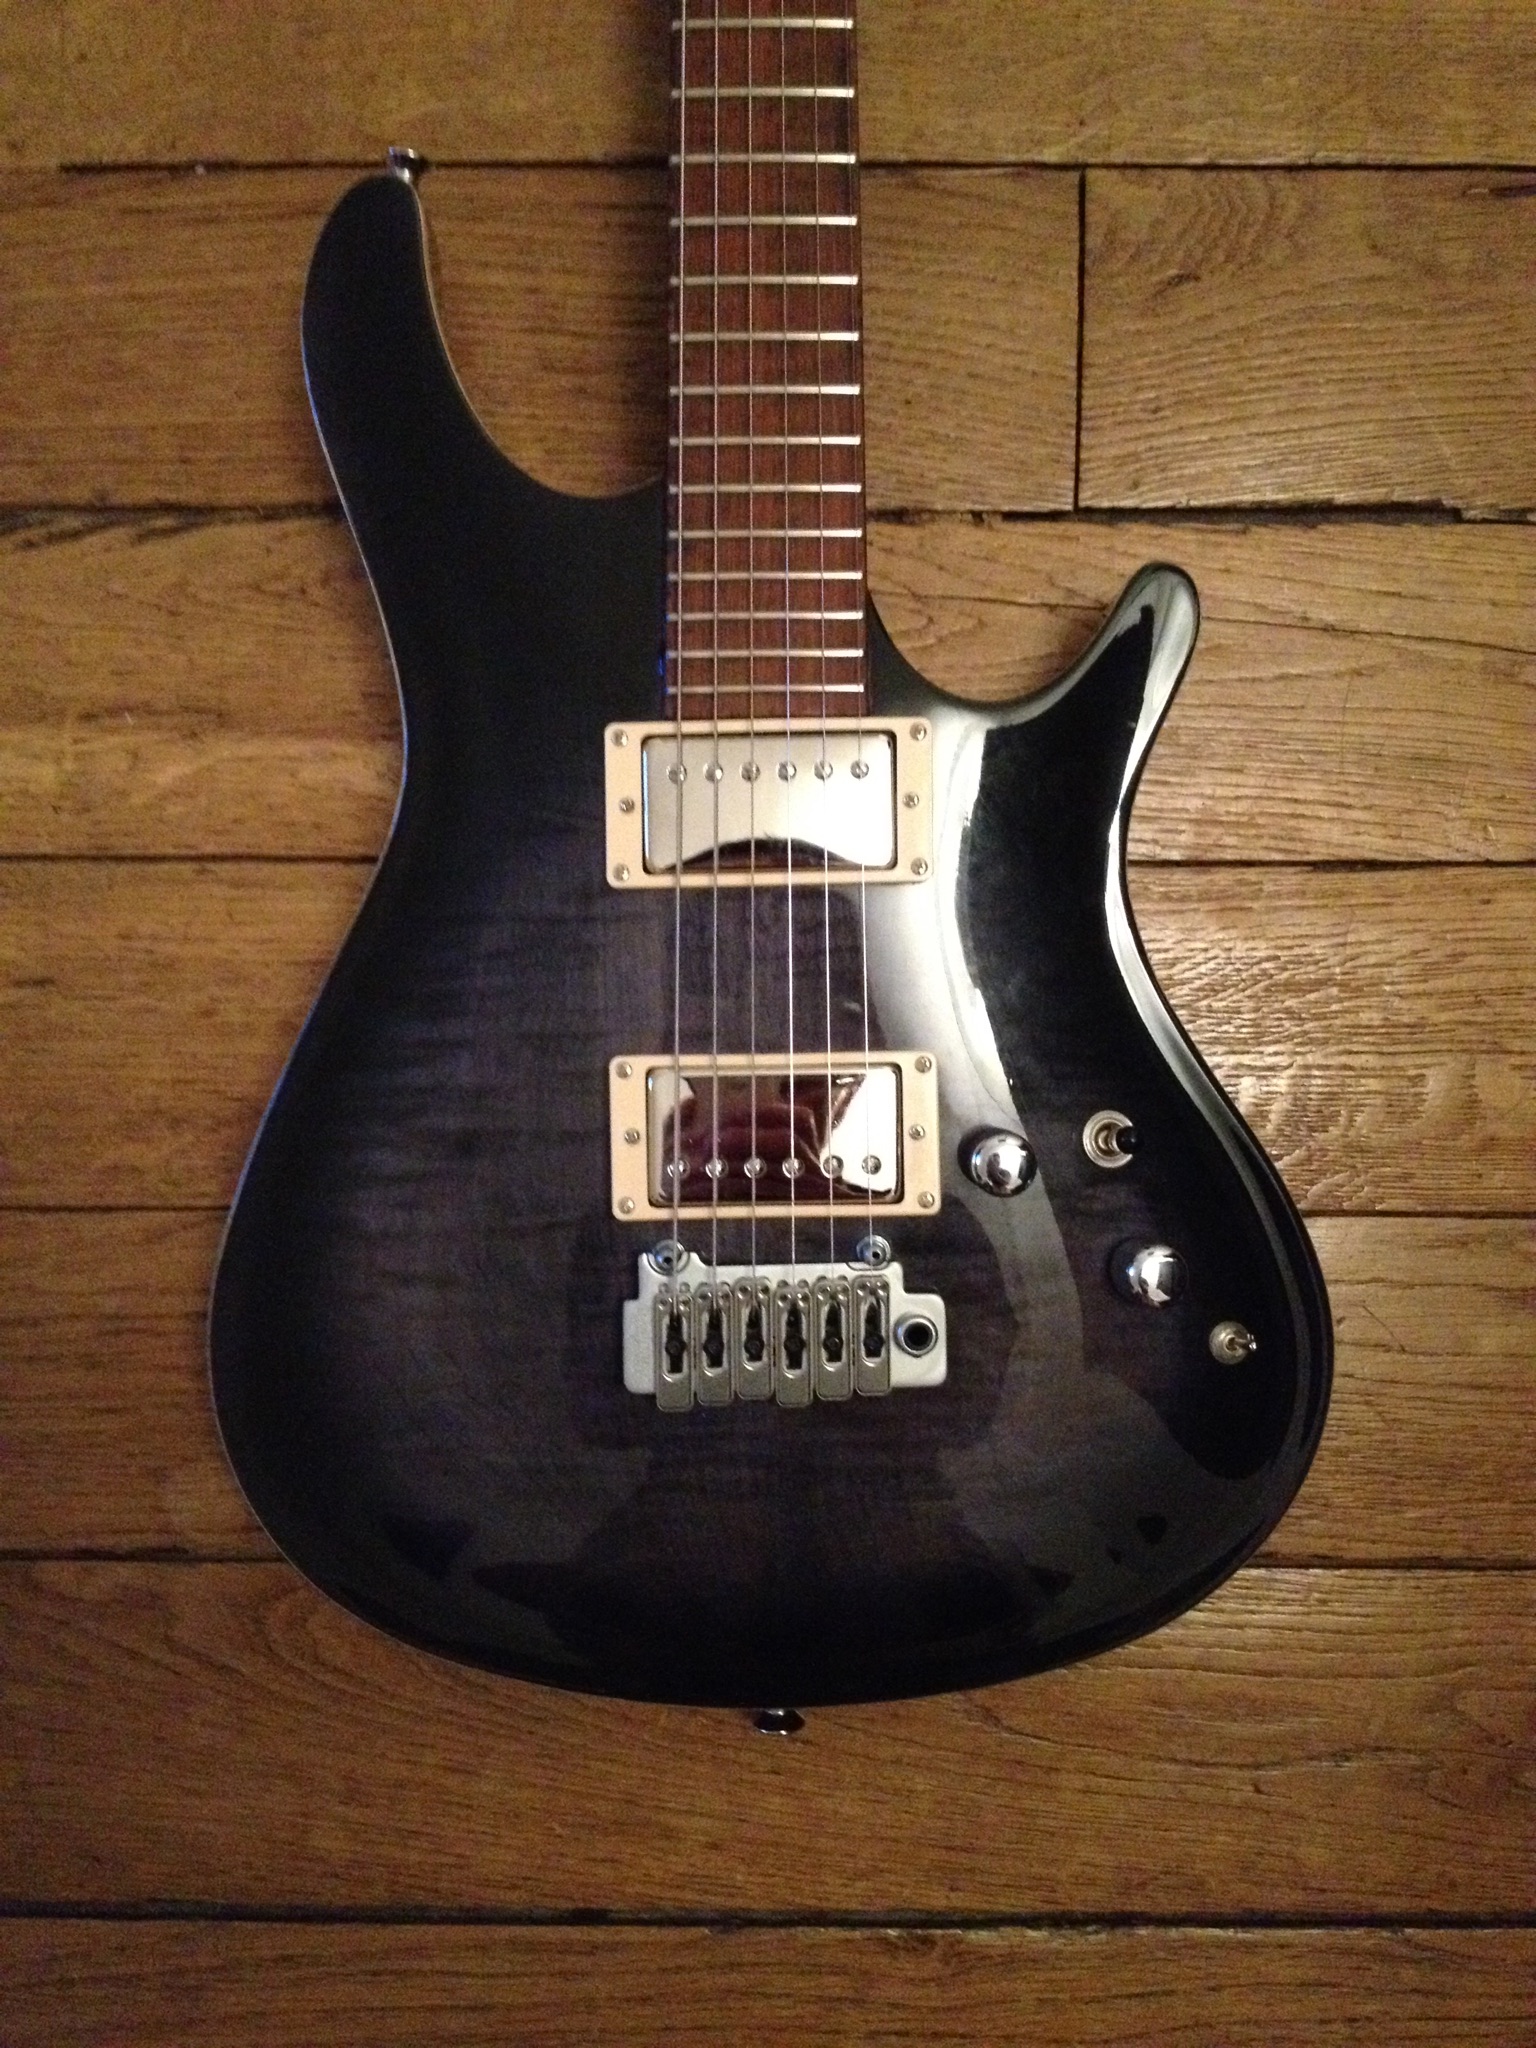 Assona Curve from @MJSGuitars: a great luthier guitar